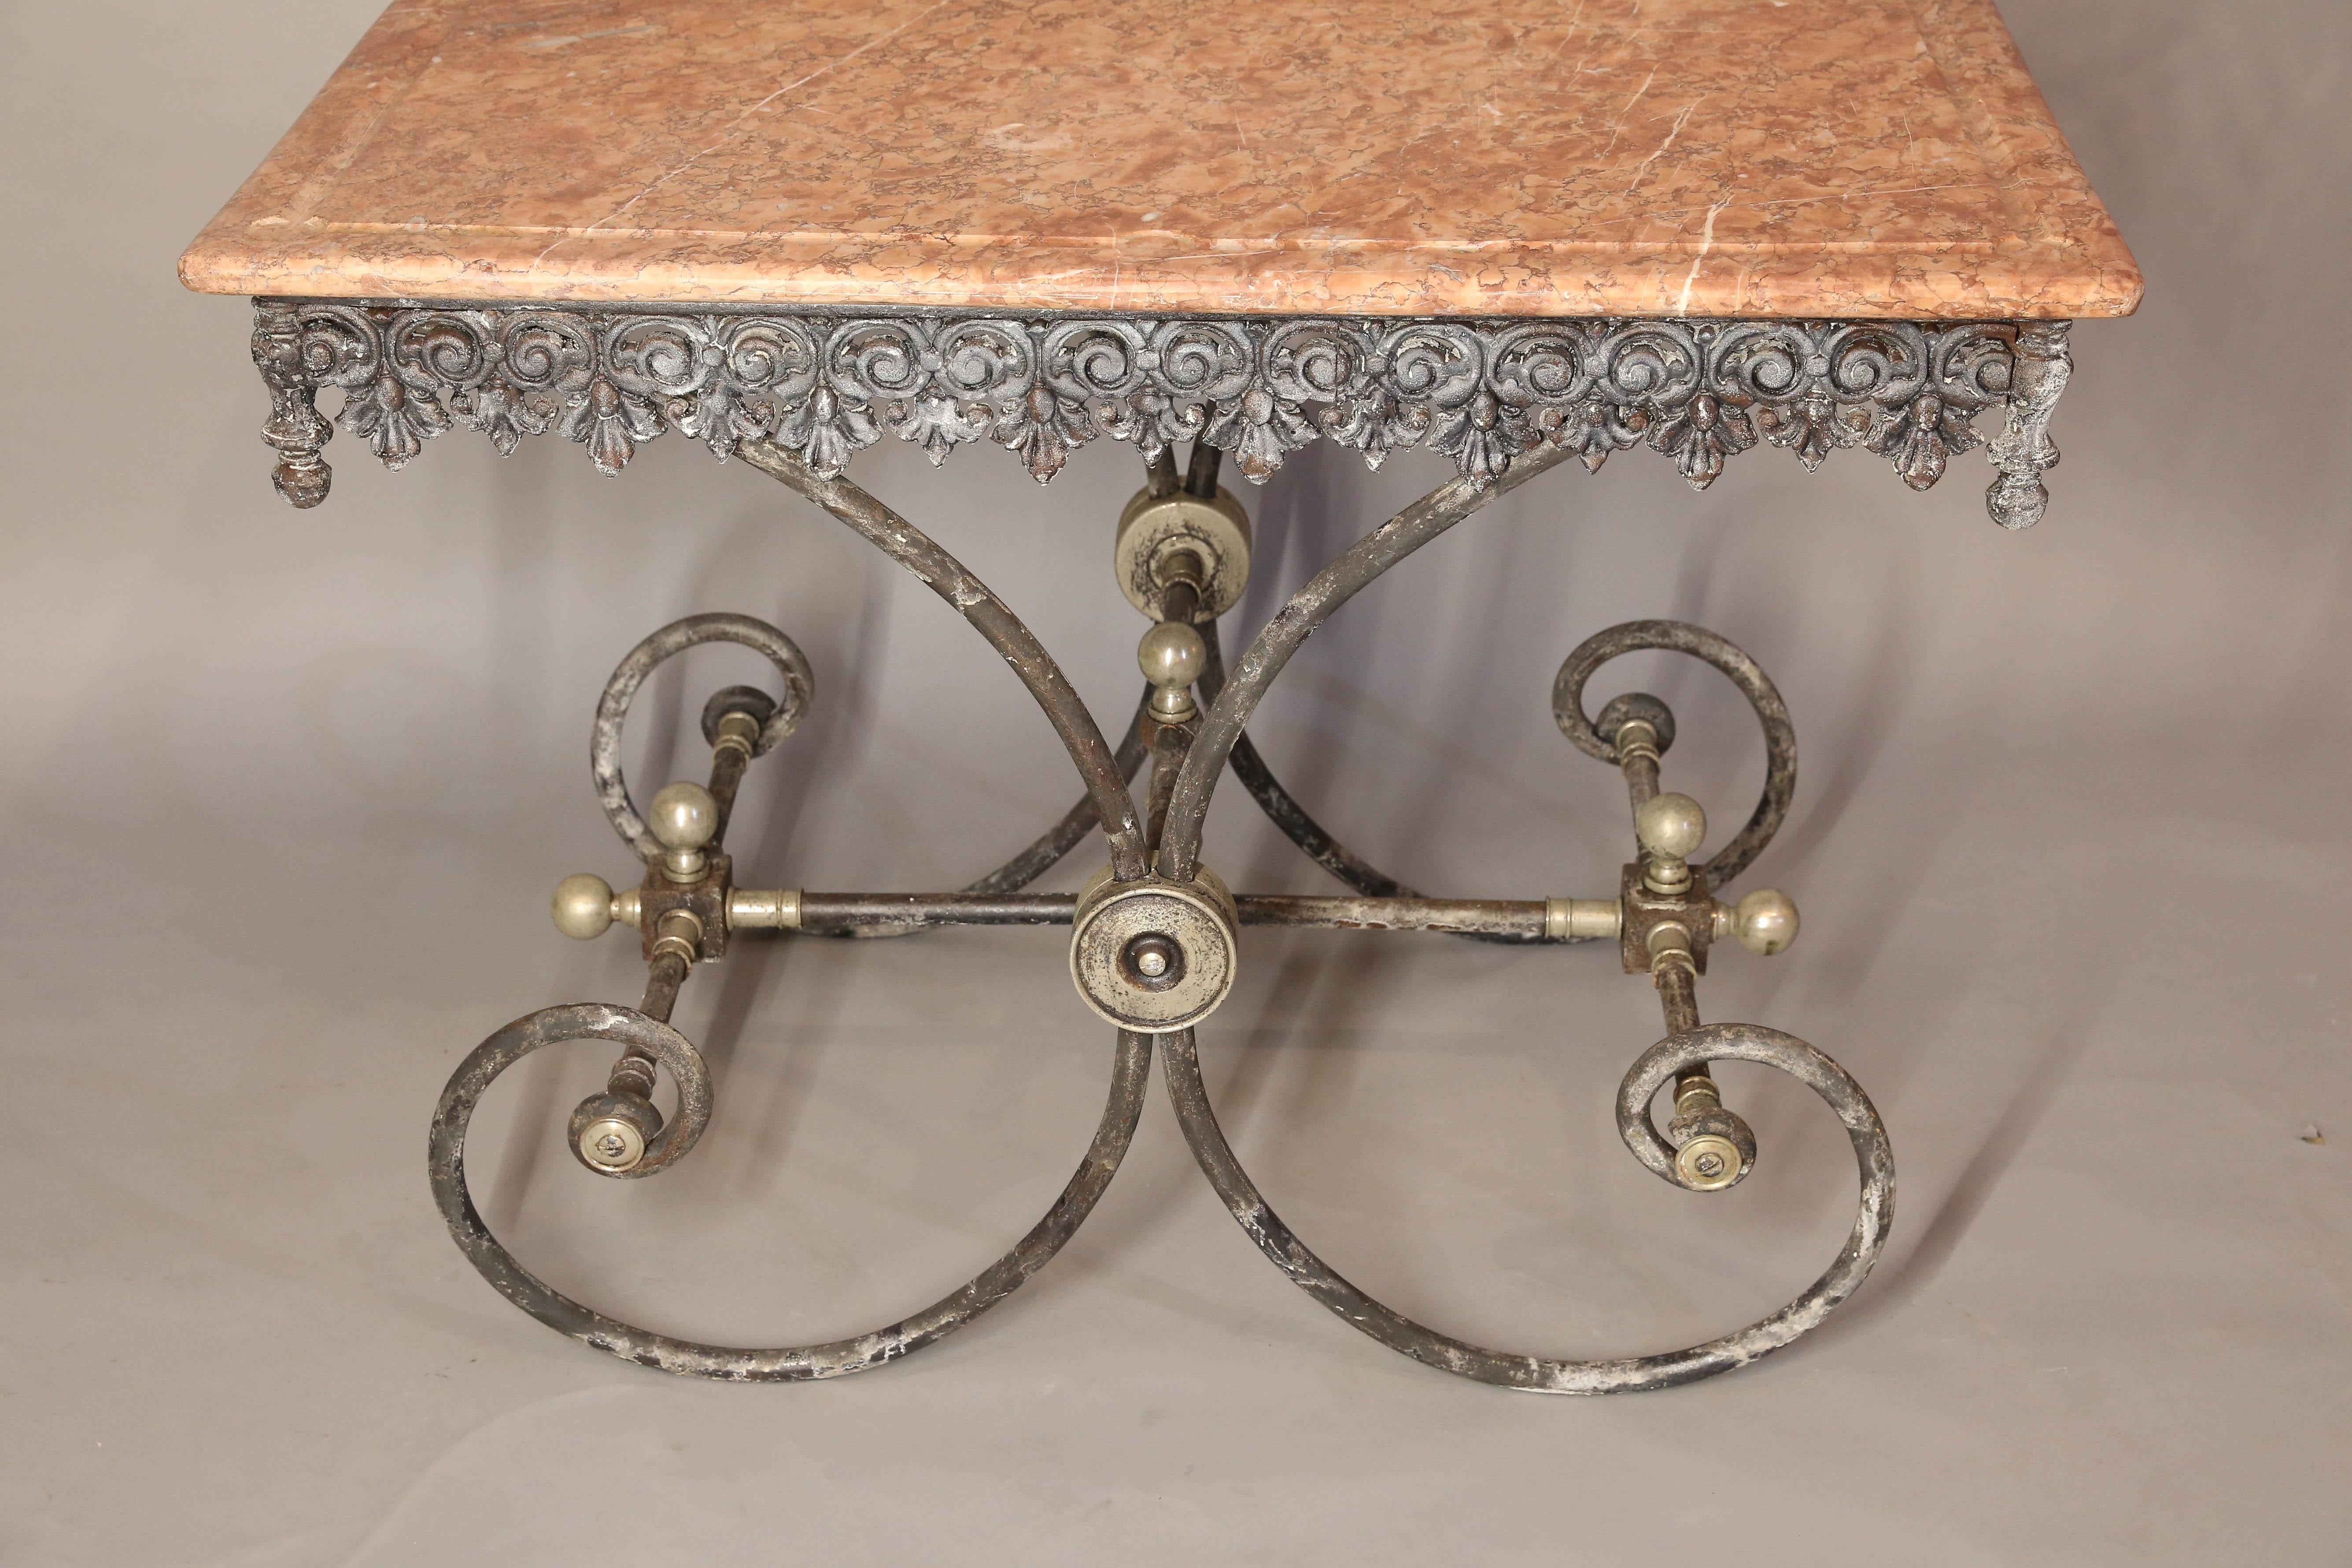 French pastry table has a decorative apron, rosettes and other decorative metal hardware on a scrolled base.
Marble top is Sienna color with a carved channel around perimeter. May have been used in butcher shop, for meat display.
 